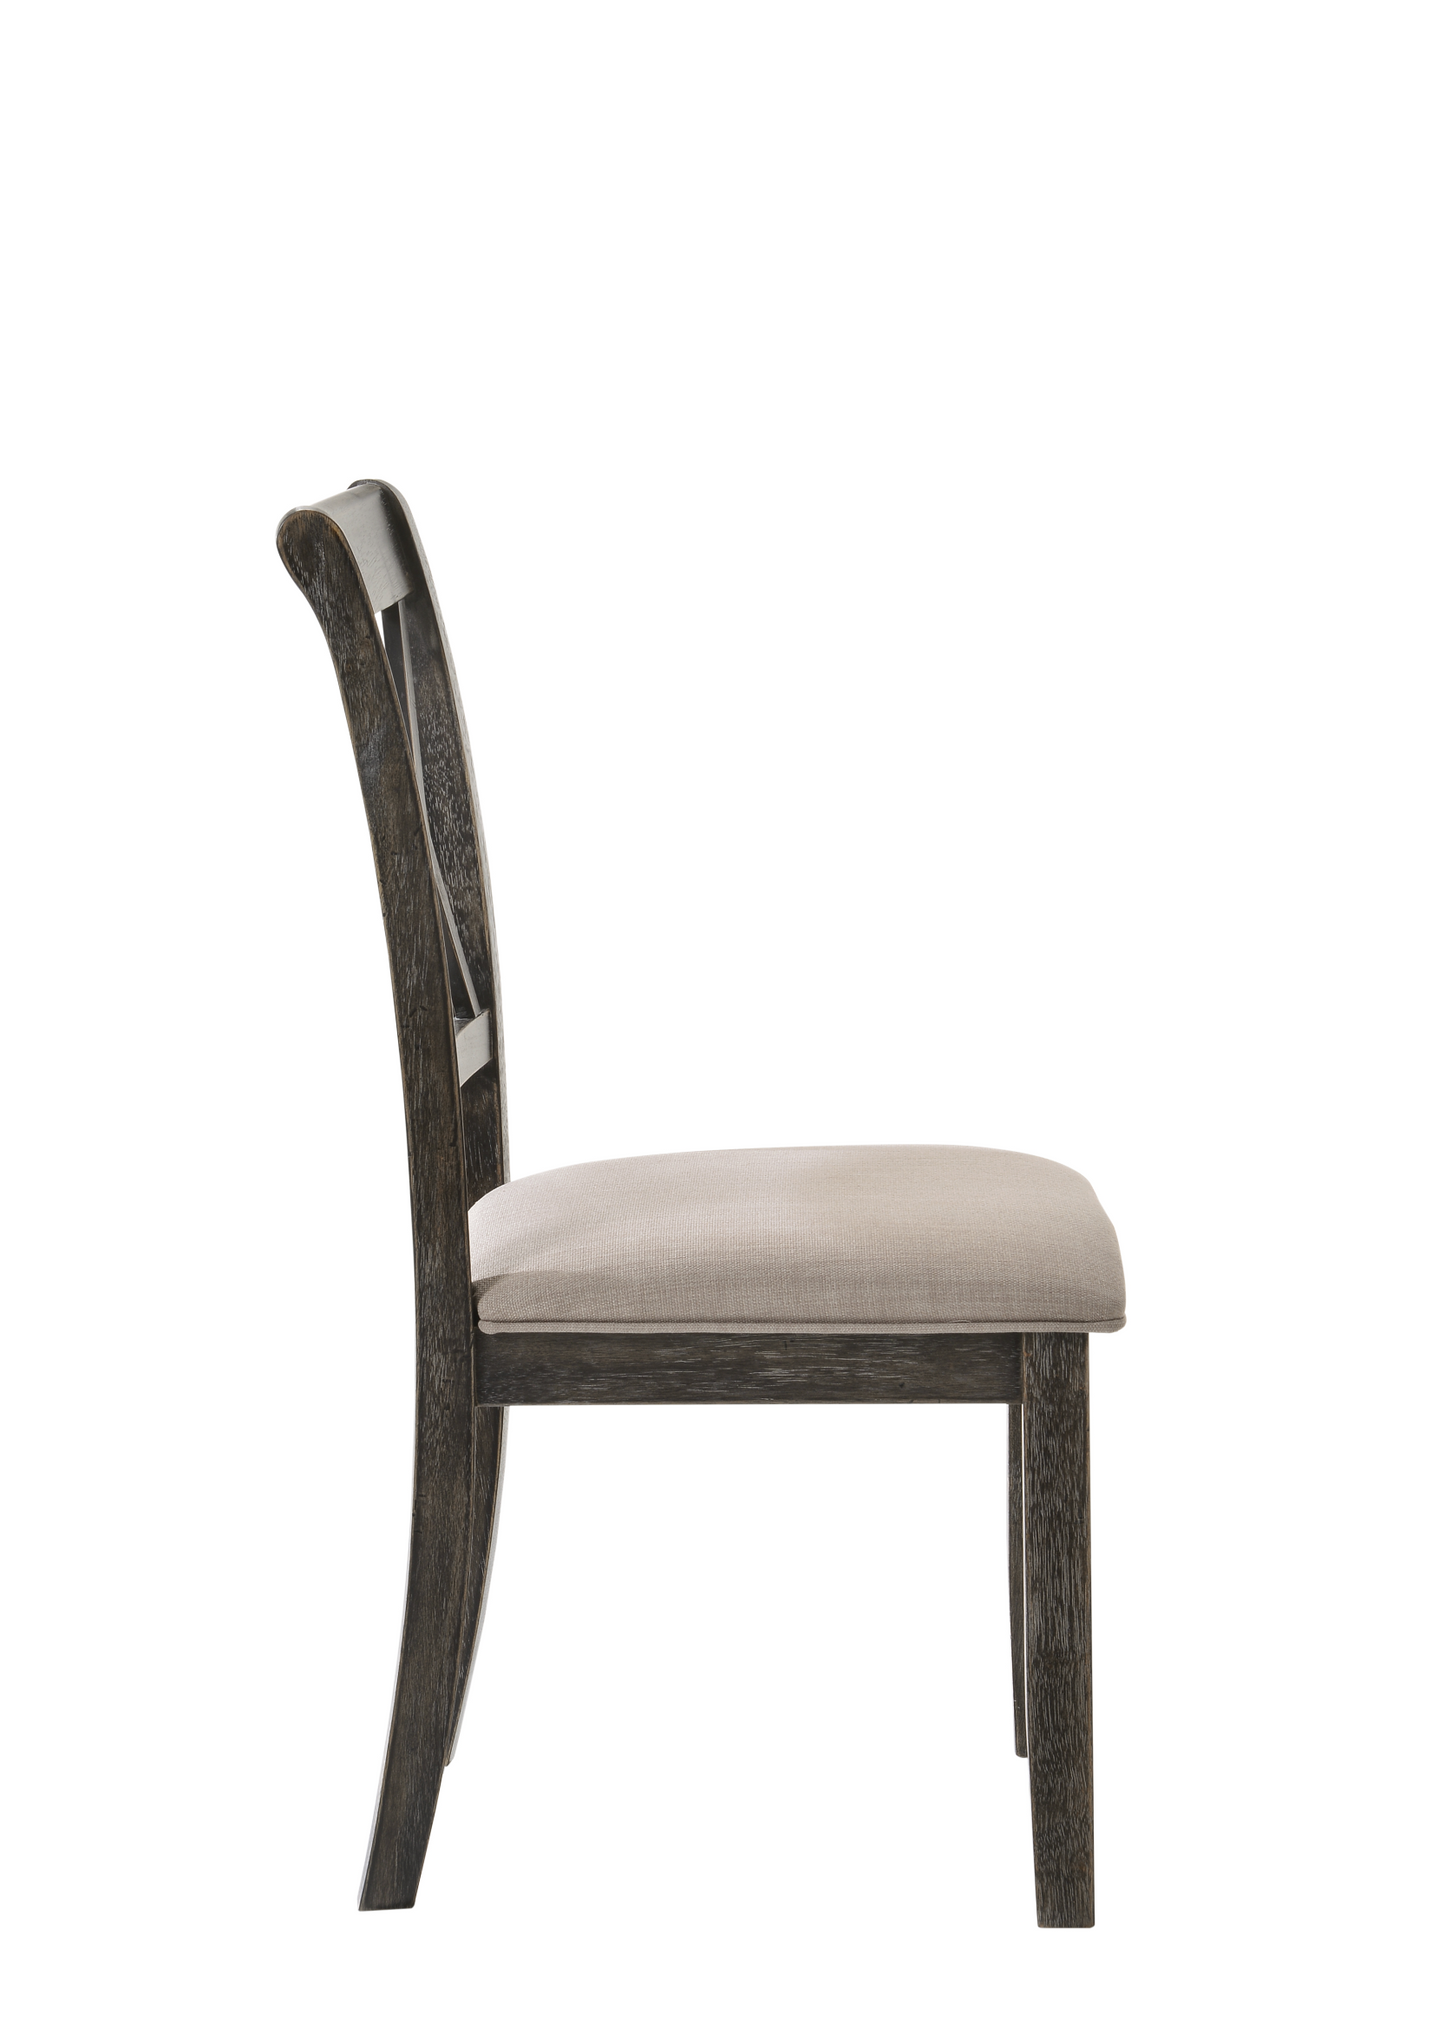 Claudia II Dining Chairs (2 Set)